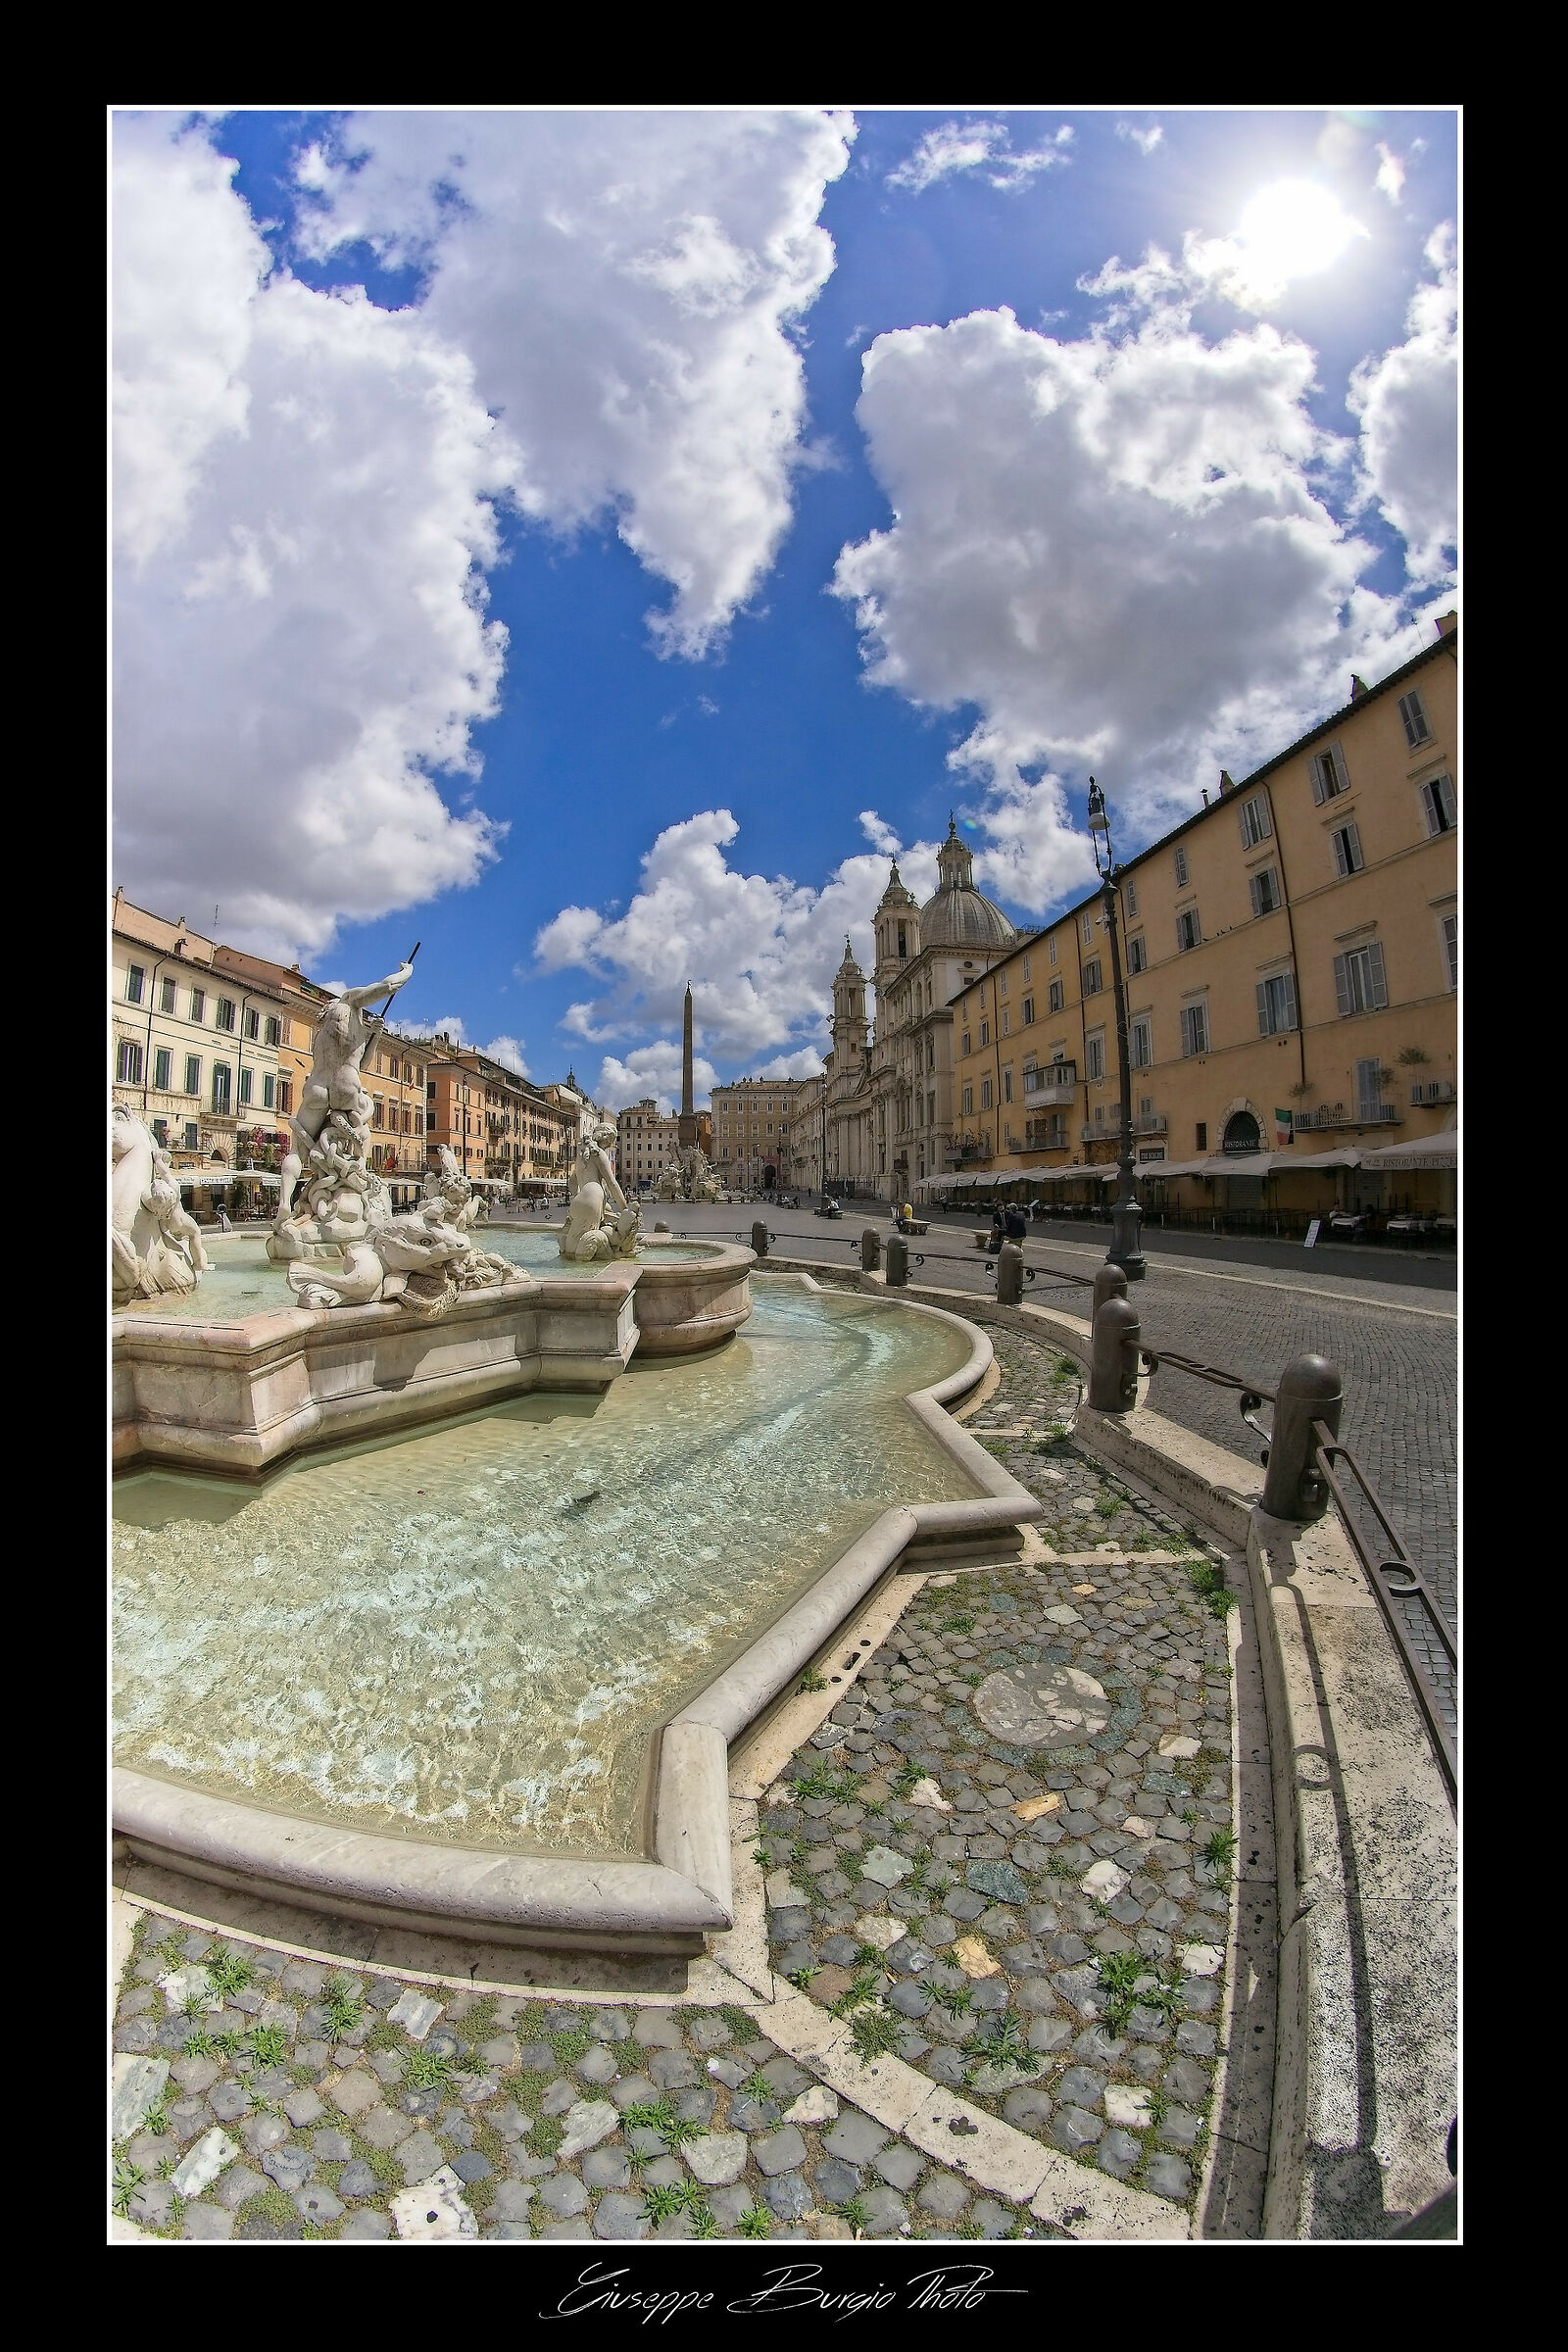 The sky on Piazza Navona...